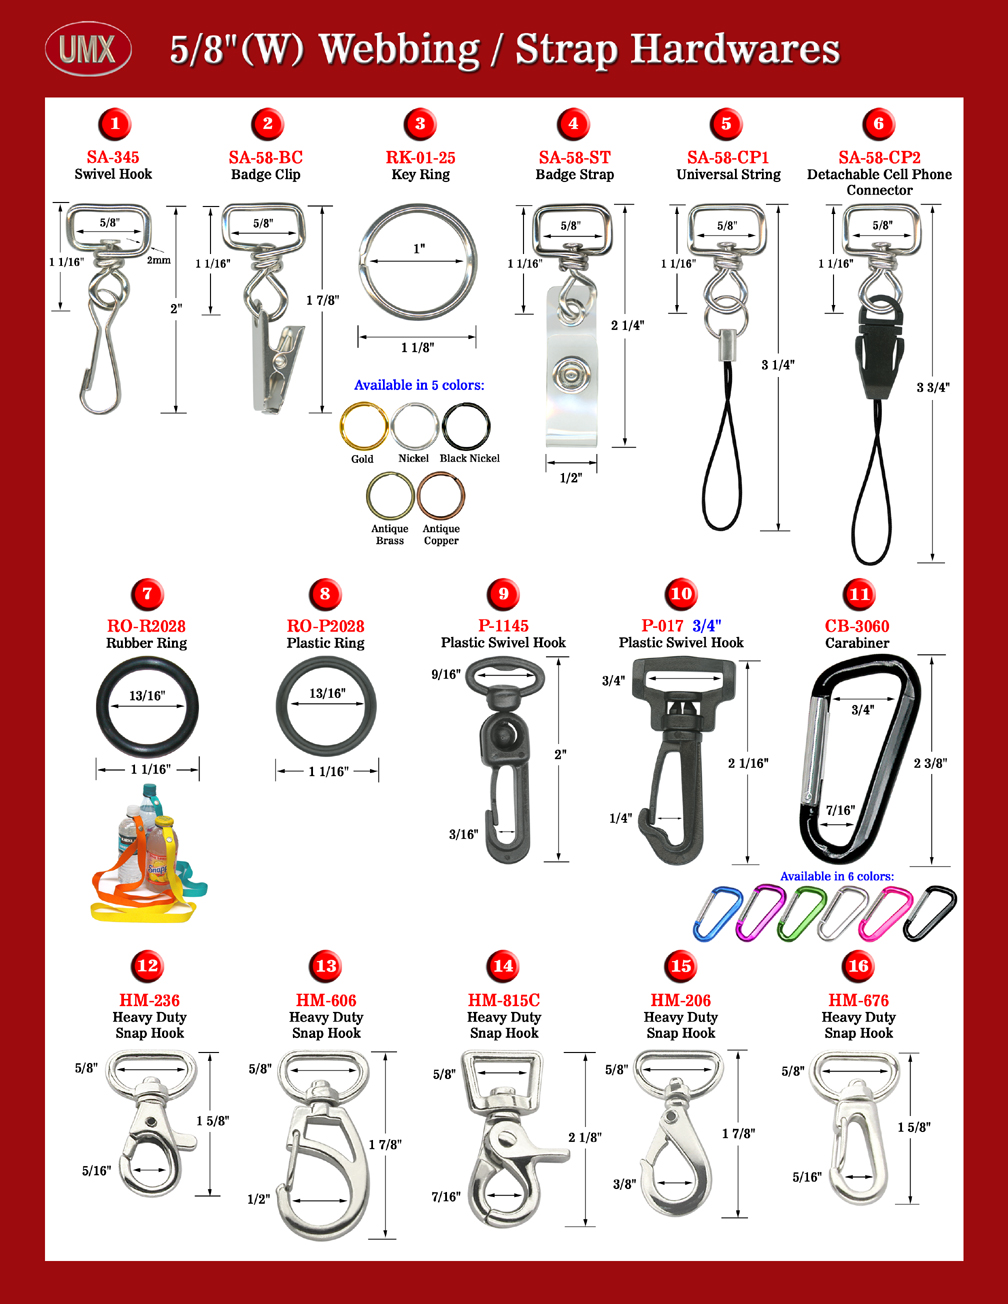 Helpful Hardware Attachment Order Direction - For 5/8" Heavy Duty Nylon, Cotton or Polyester Webbing Lanyards or Leashes.